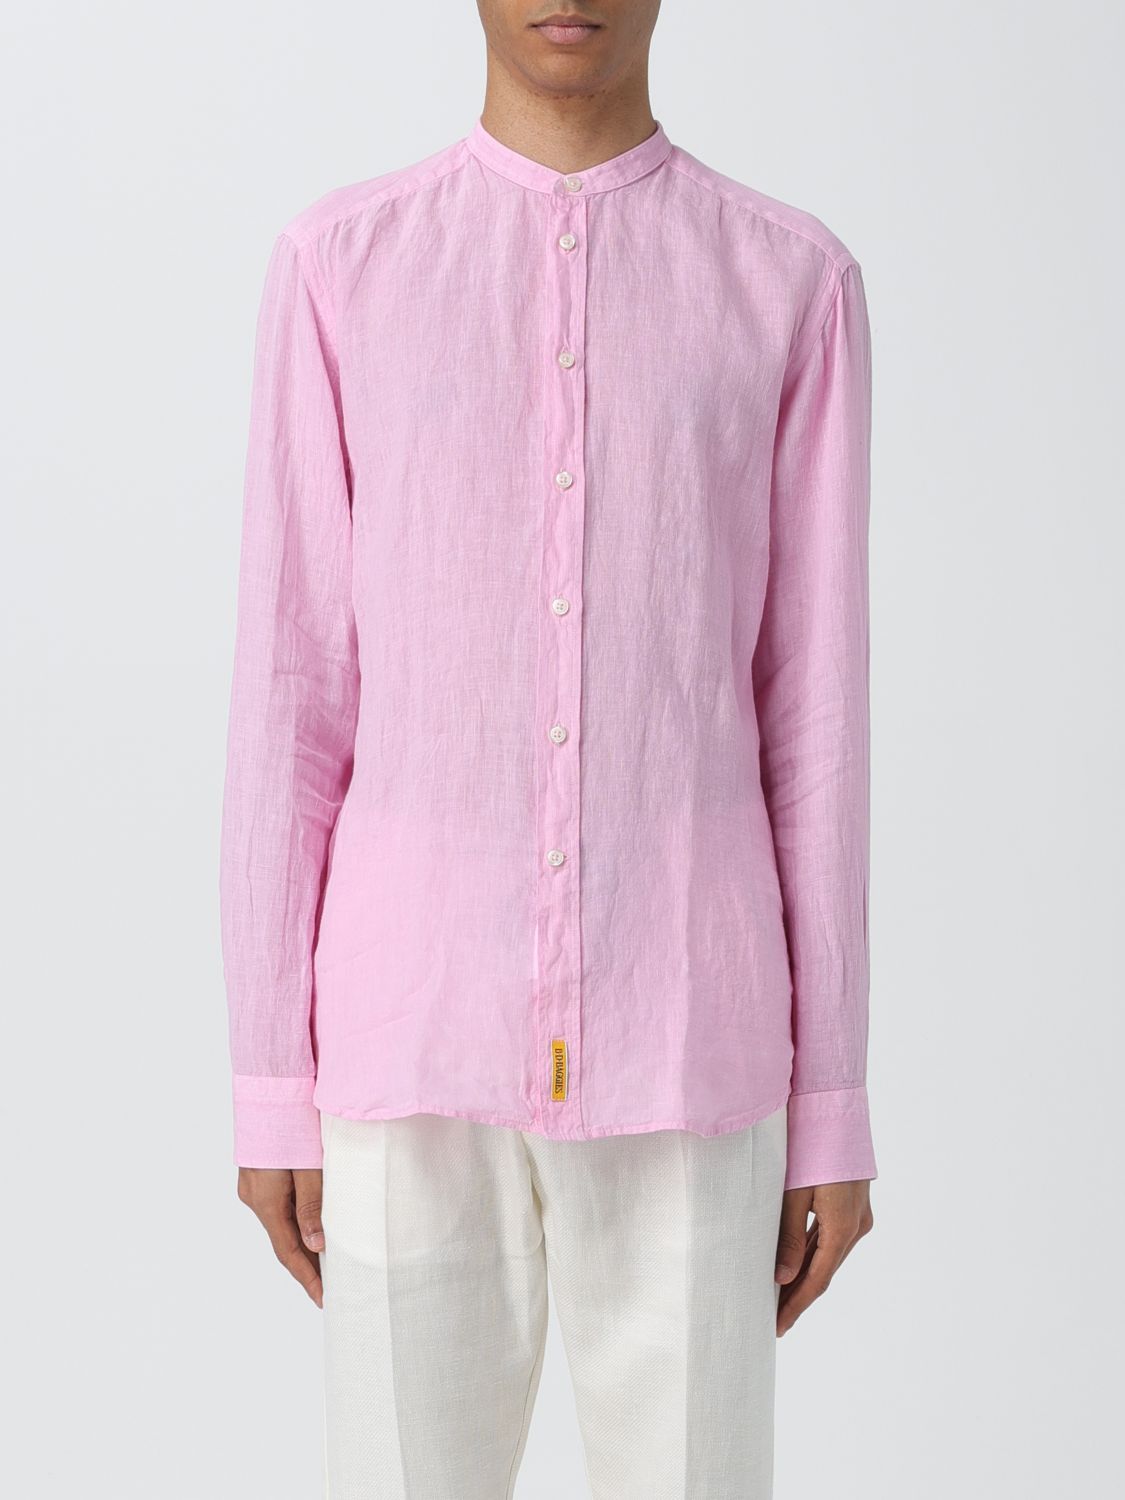 An American Tradition Shirt  Men Color Pink